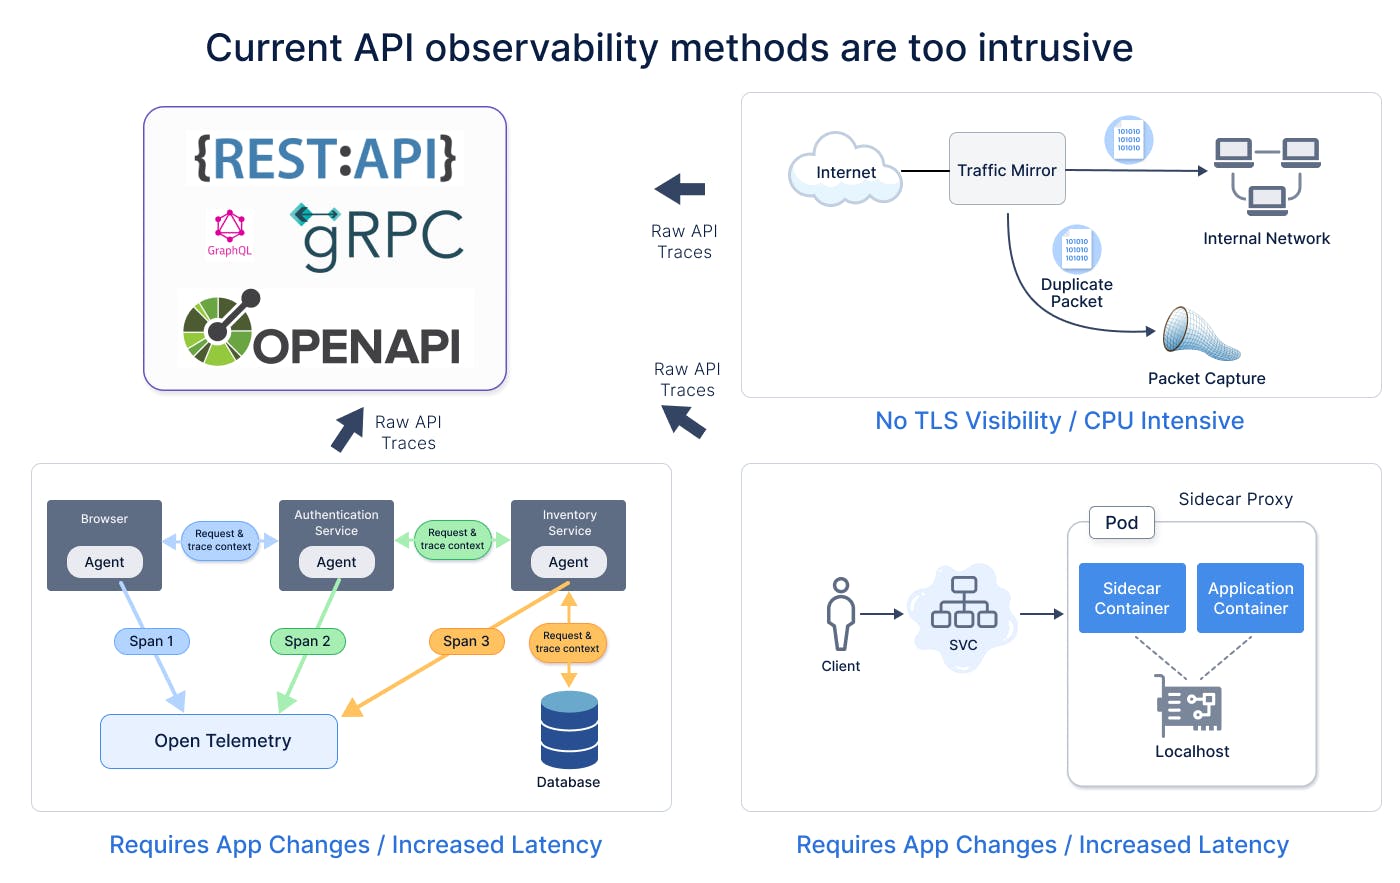 Current API Observability Methods Cause High Friction